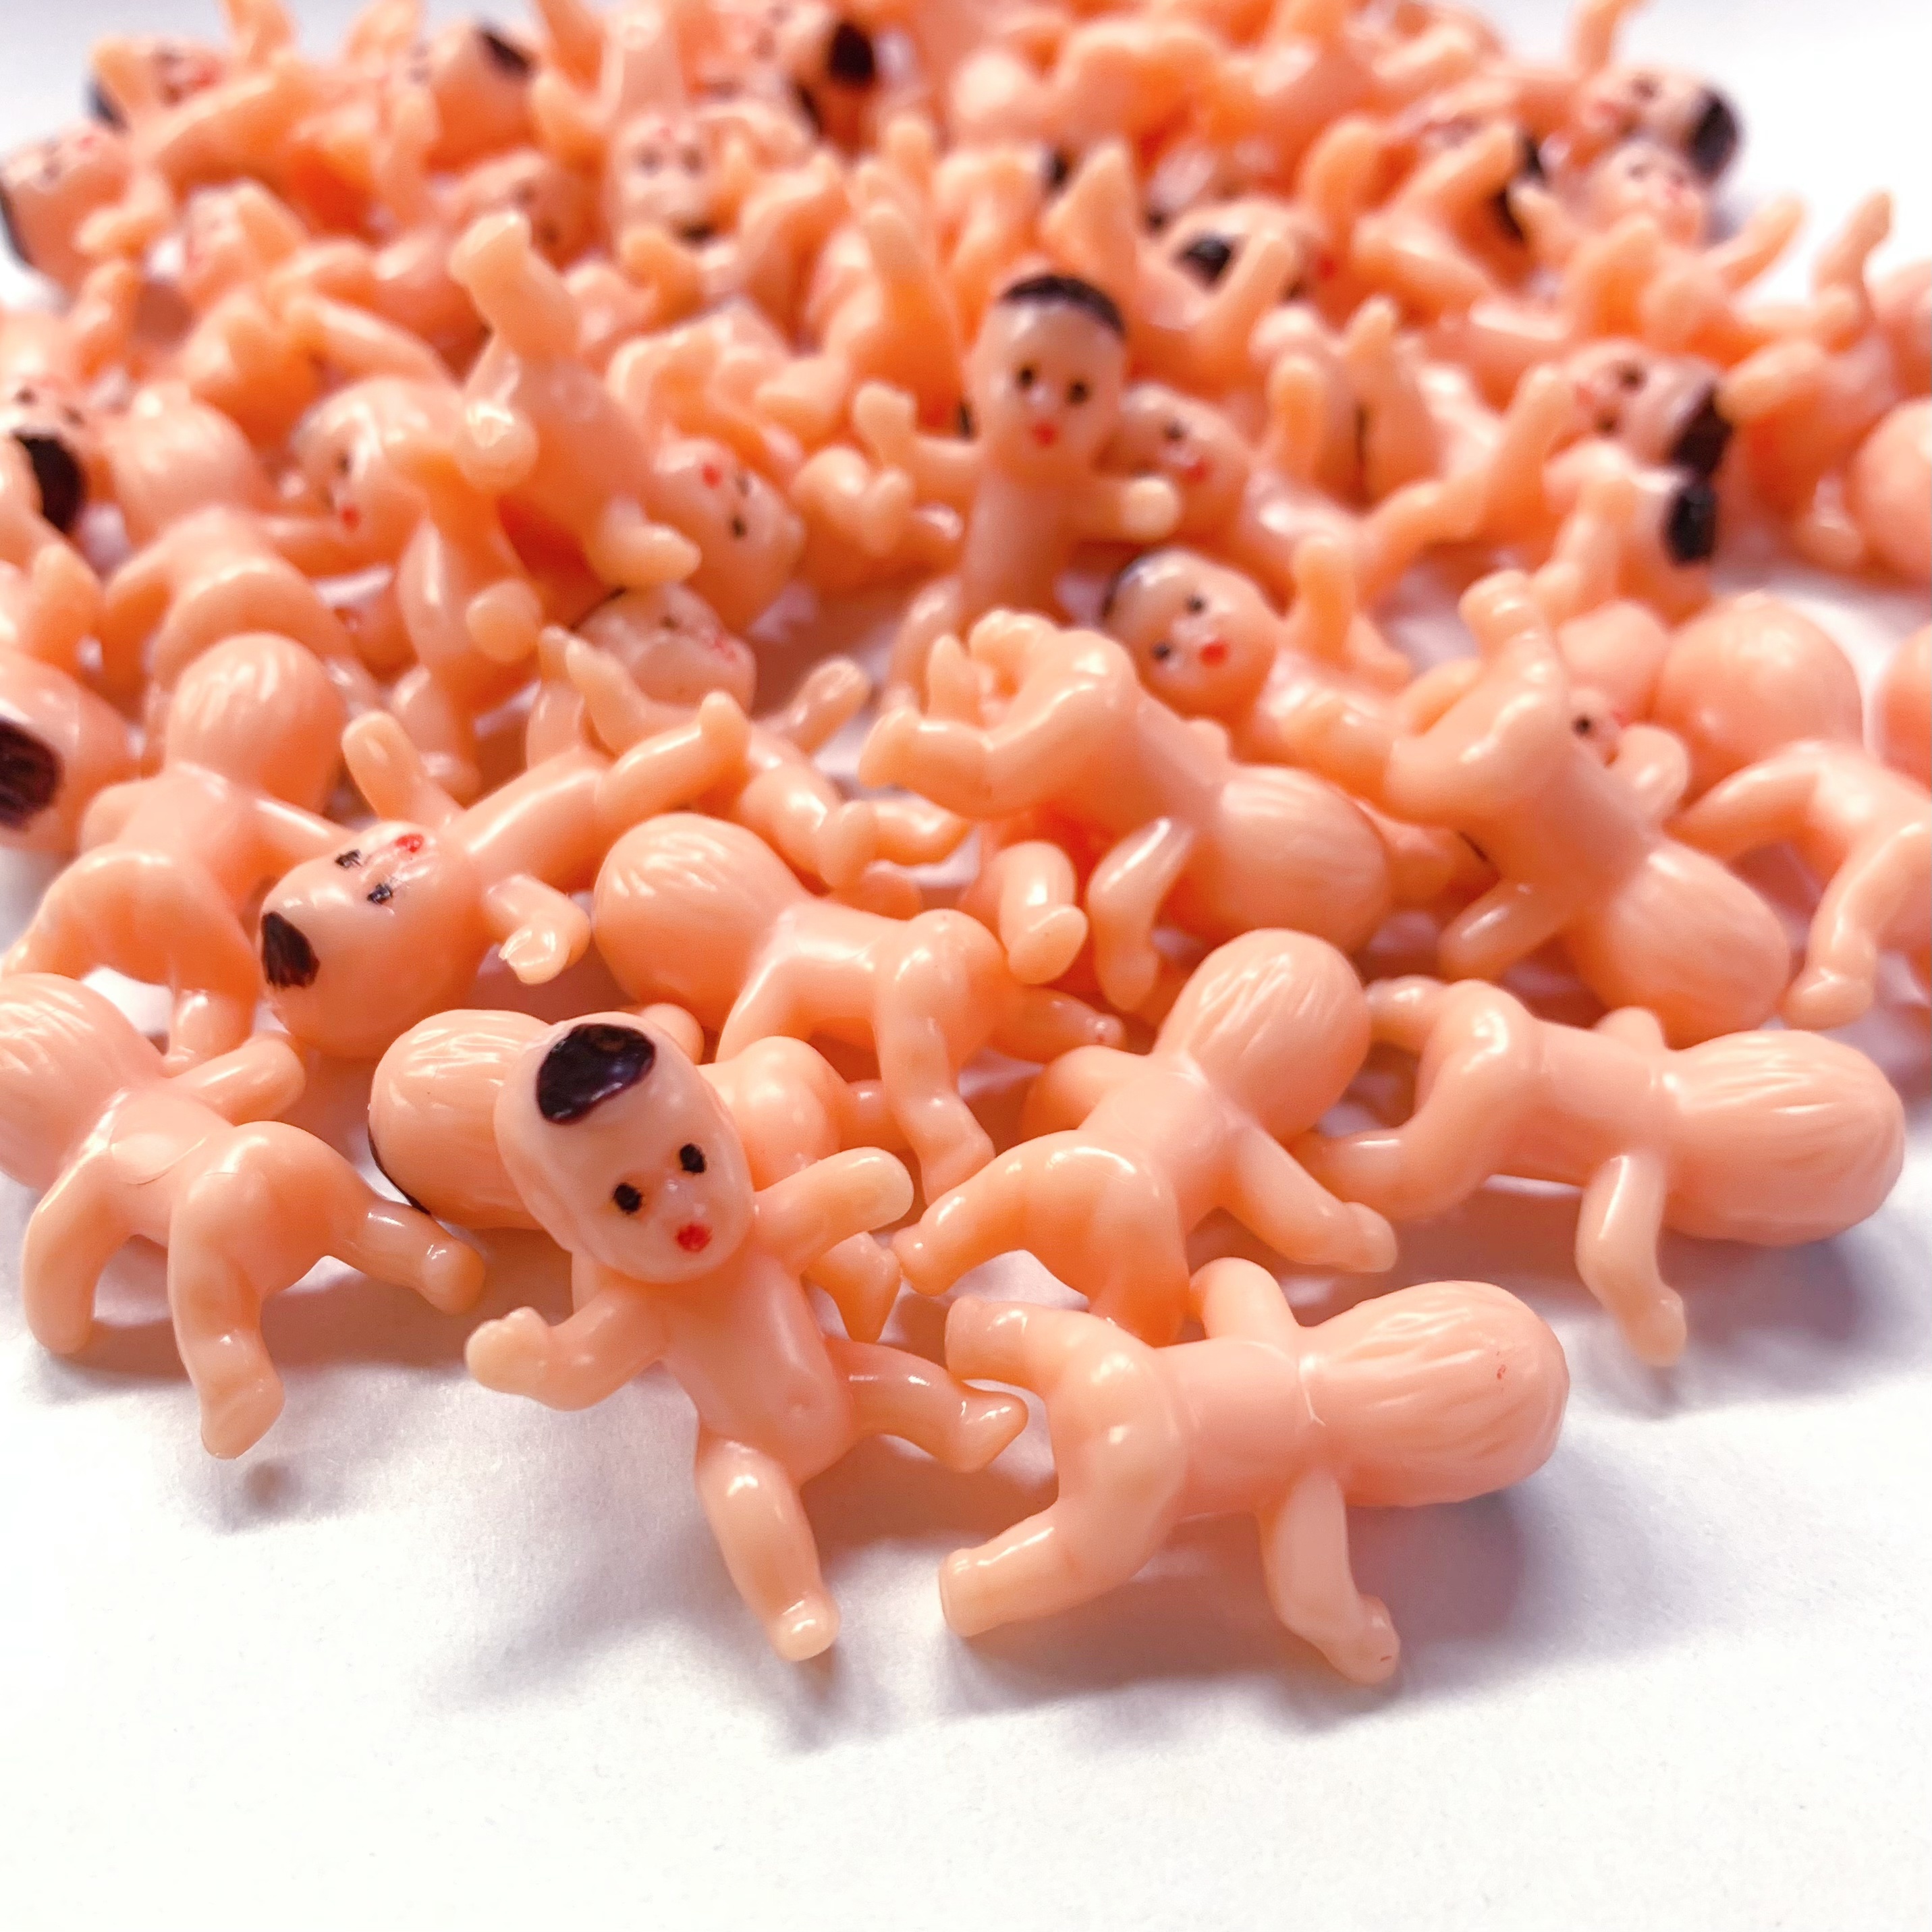 Zalmoxe Mini Plastic Babies 300 Pcs, Tiny Baby Figurines Small King Cake  Babies Bulk for Baby Shower Ice Cube Game Party Favors Decorations Crafting  1